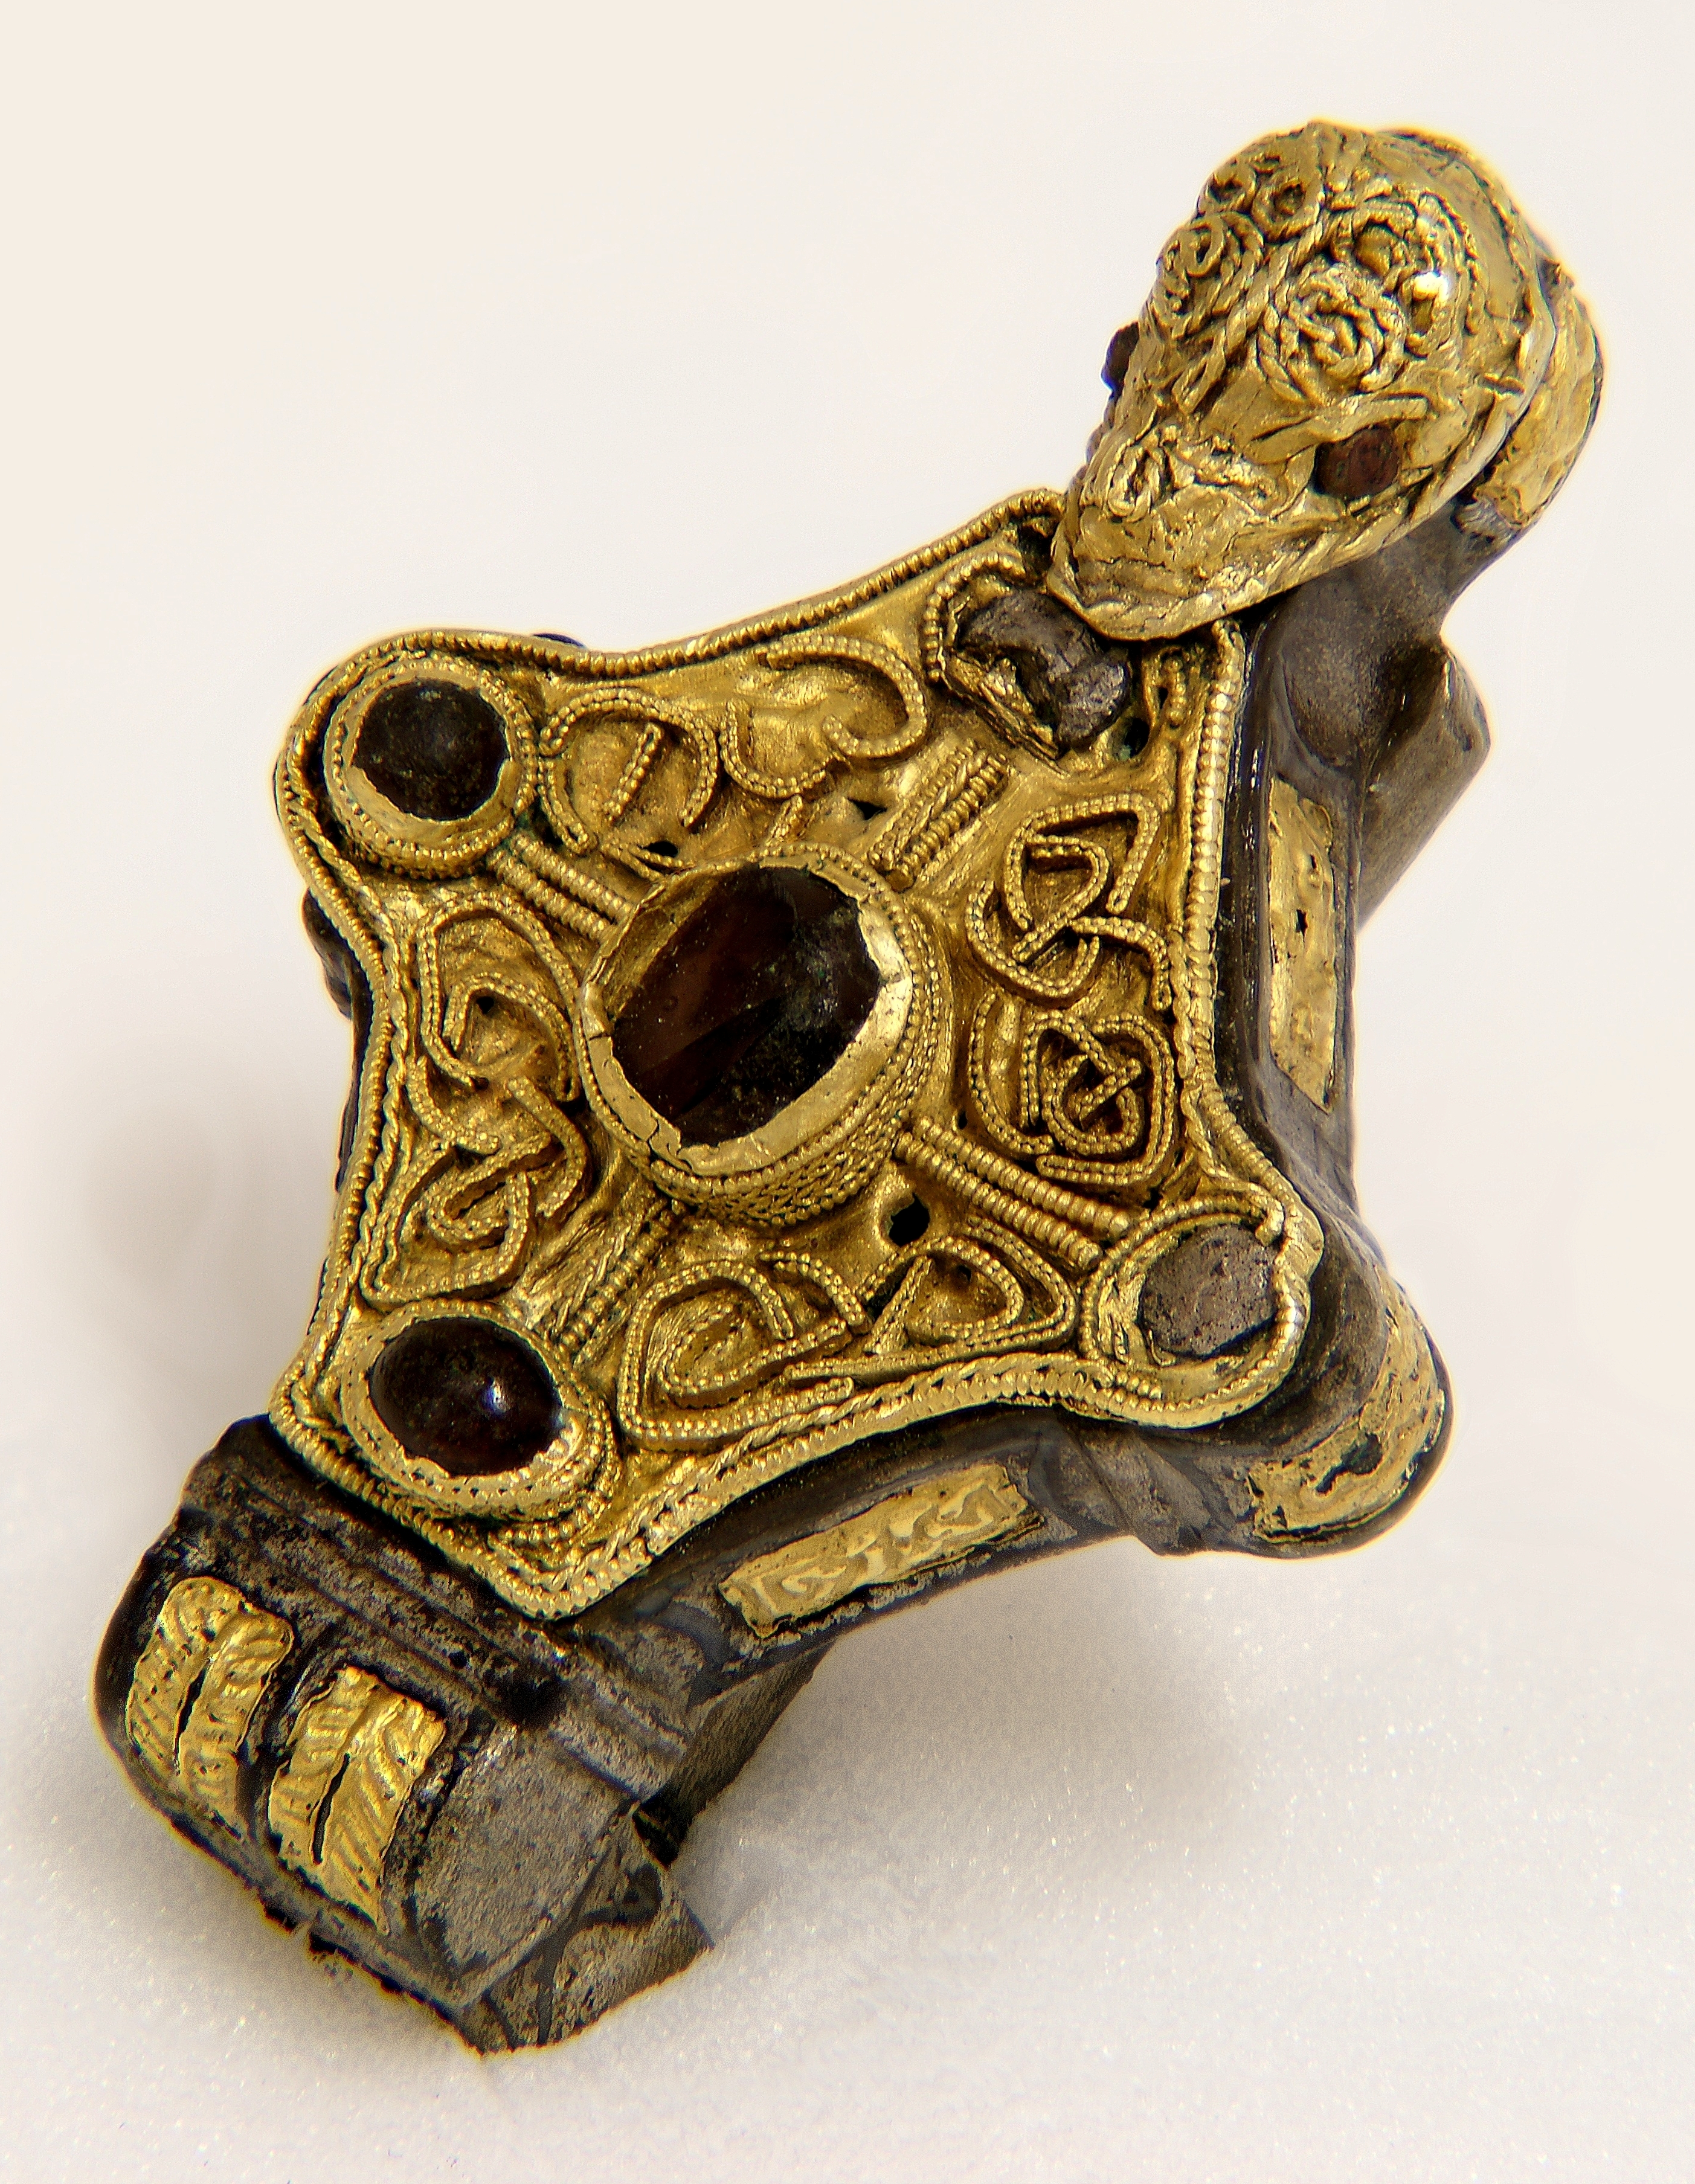 The Waterford Kite Brooch